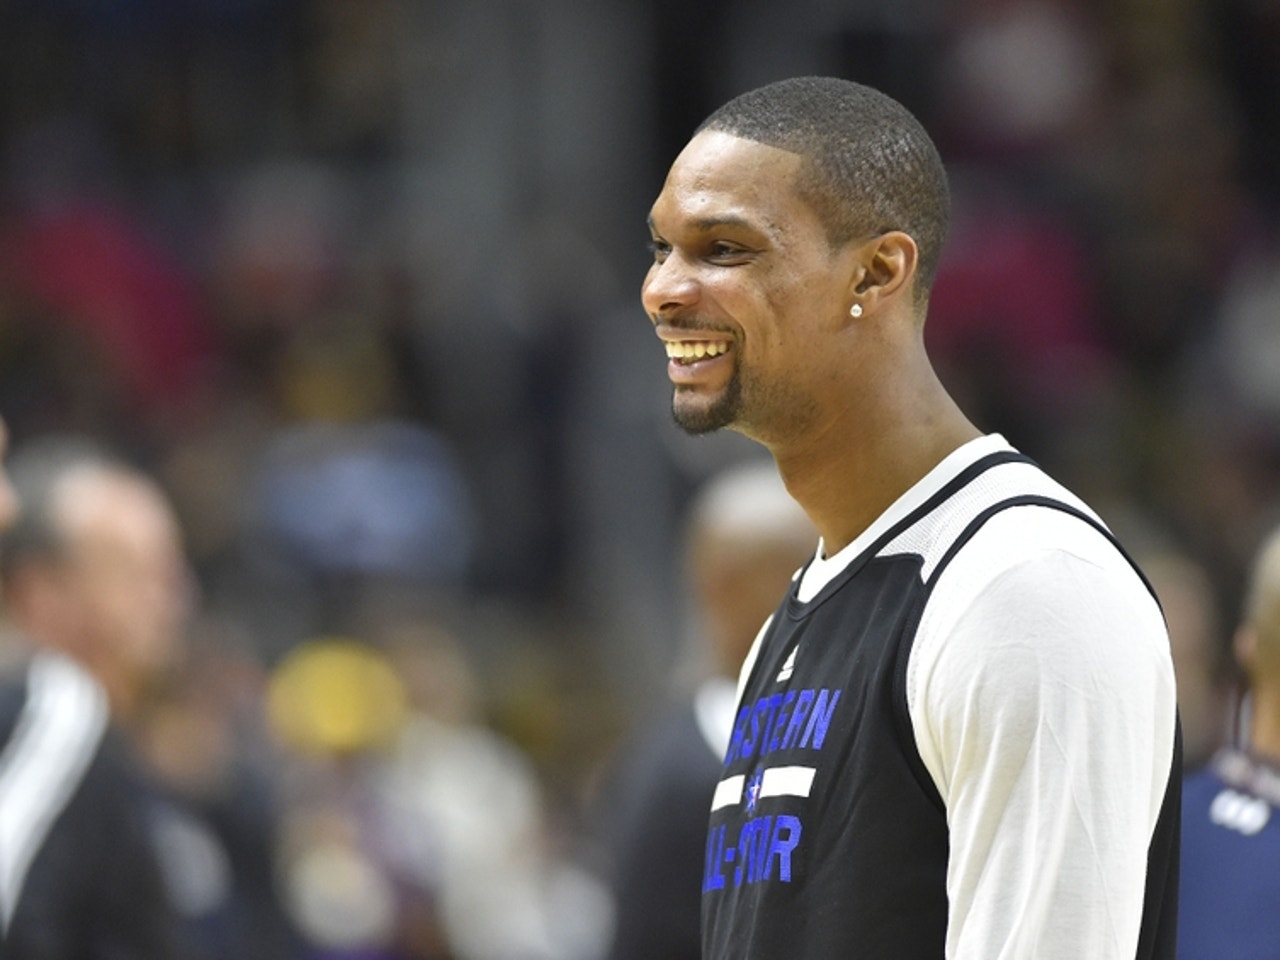 NBA Rumors: Chris Bosh Frustrated With Heat; Feels Ready To Play